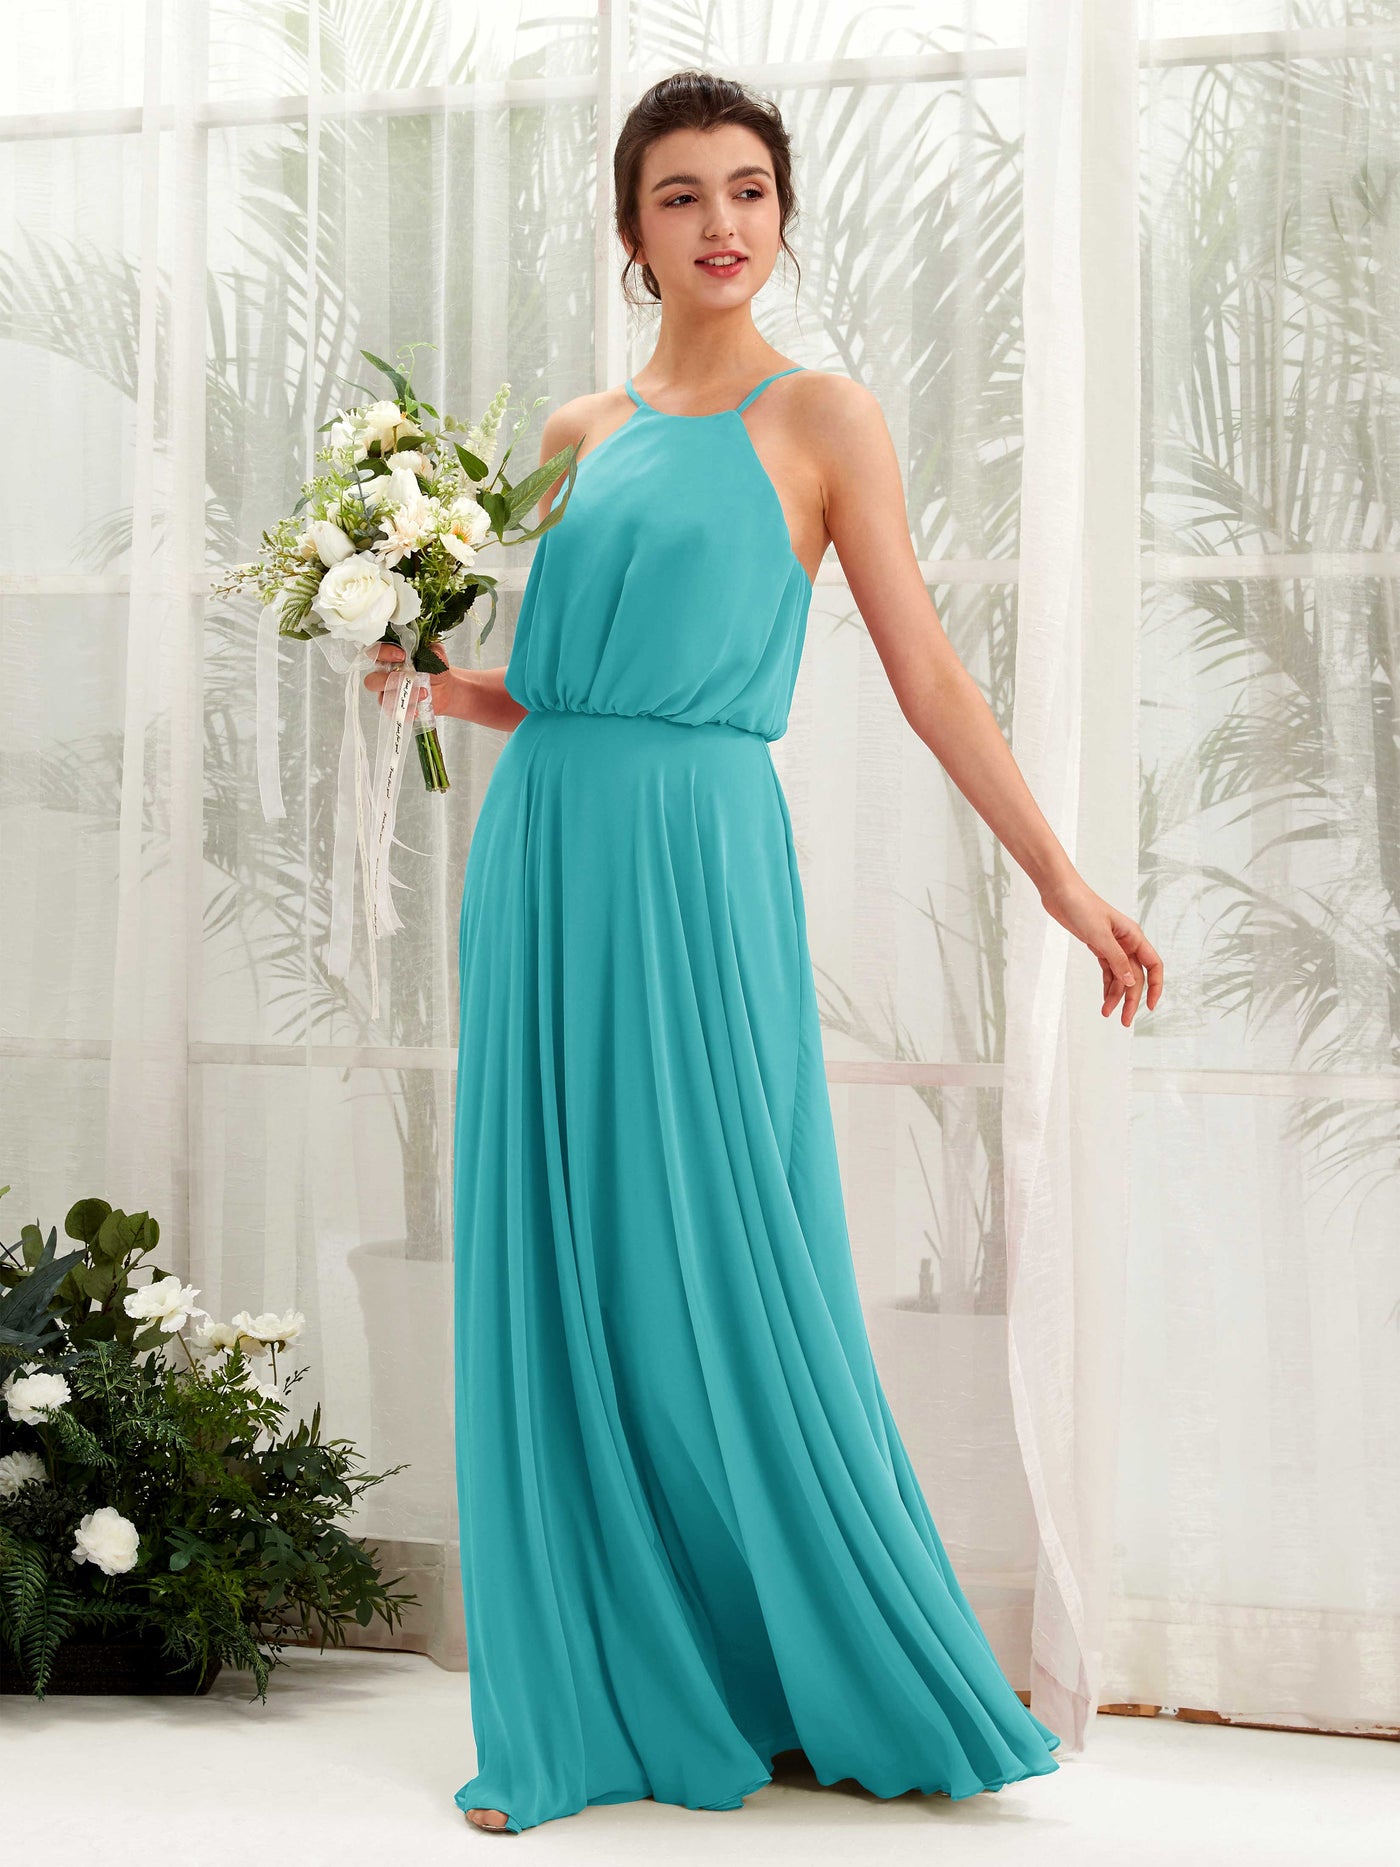 Turquoise Bridesmaid Dresses Bridesmaid Dress Ball Gown Chiffon Halter Full Length Sleeveless Wedding Party Dress (81223423)#color_turquoise